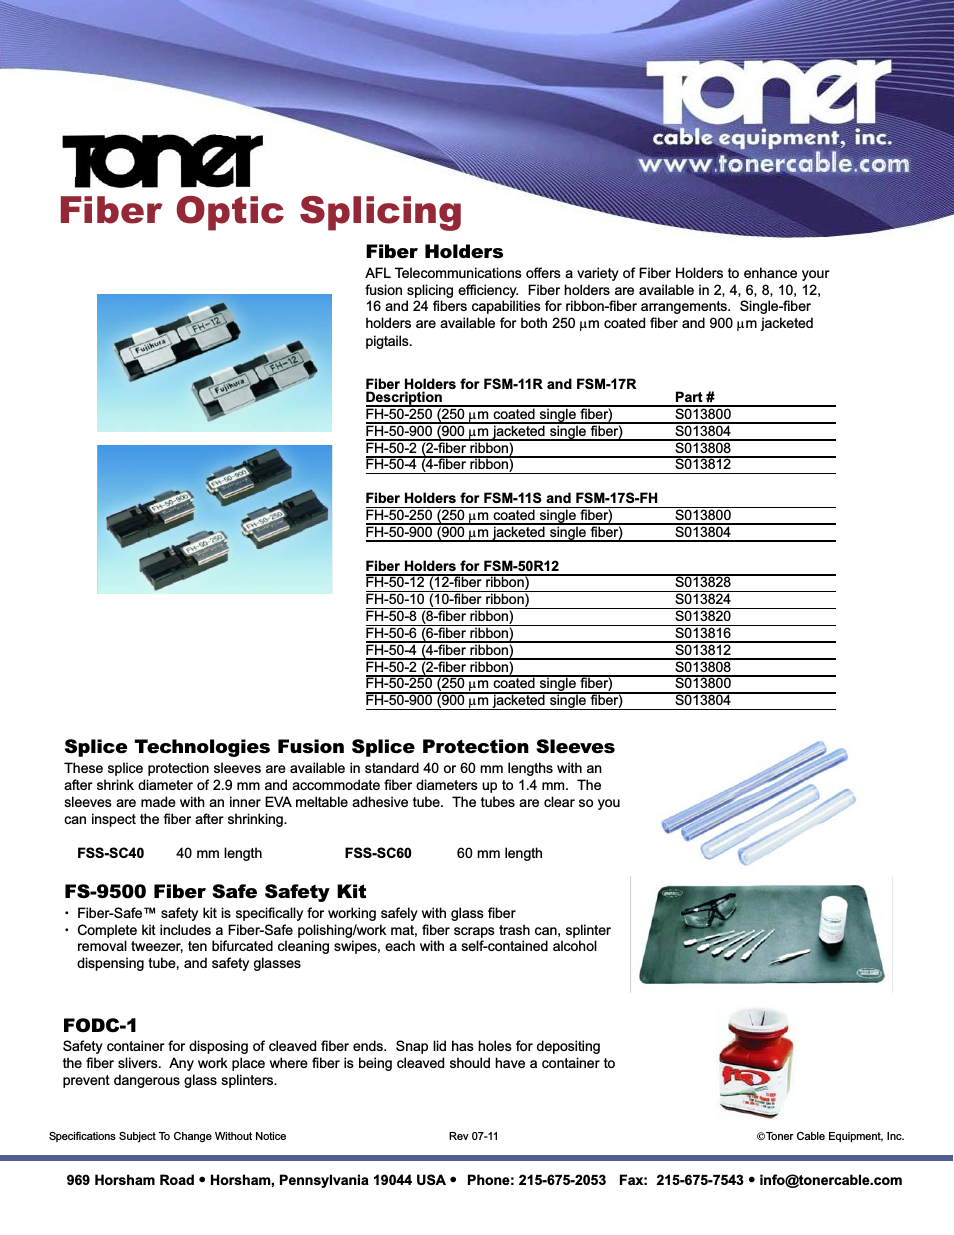 FH-50 Series Fiber Holders for Fusion Splicing